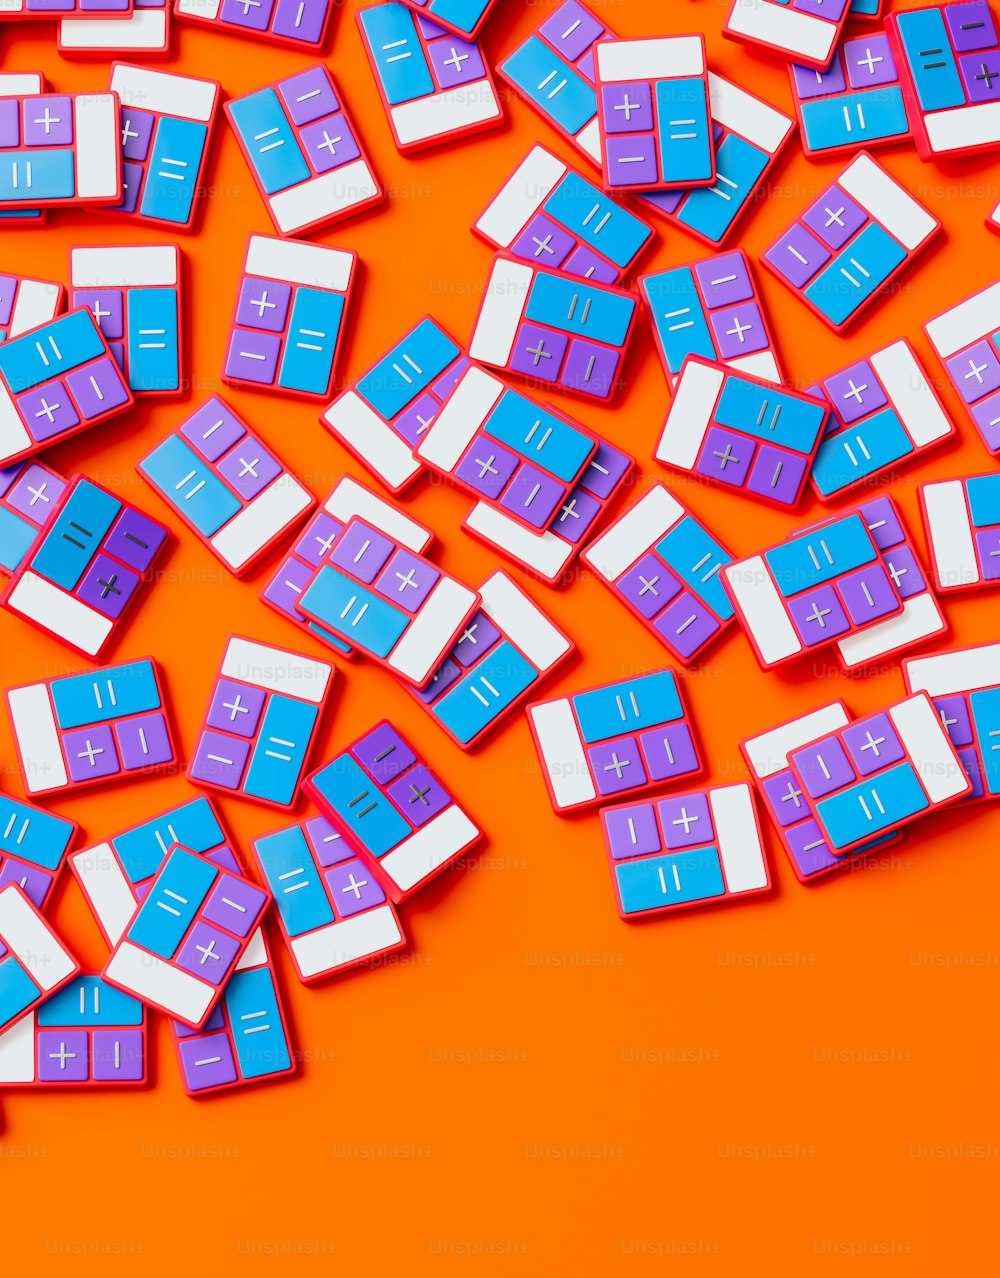 a pile of blue and white keys on an orange background